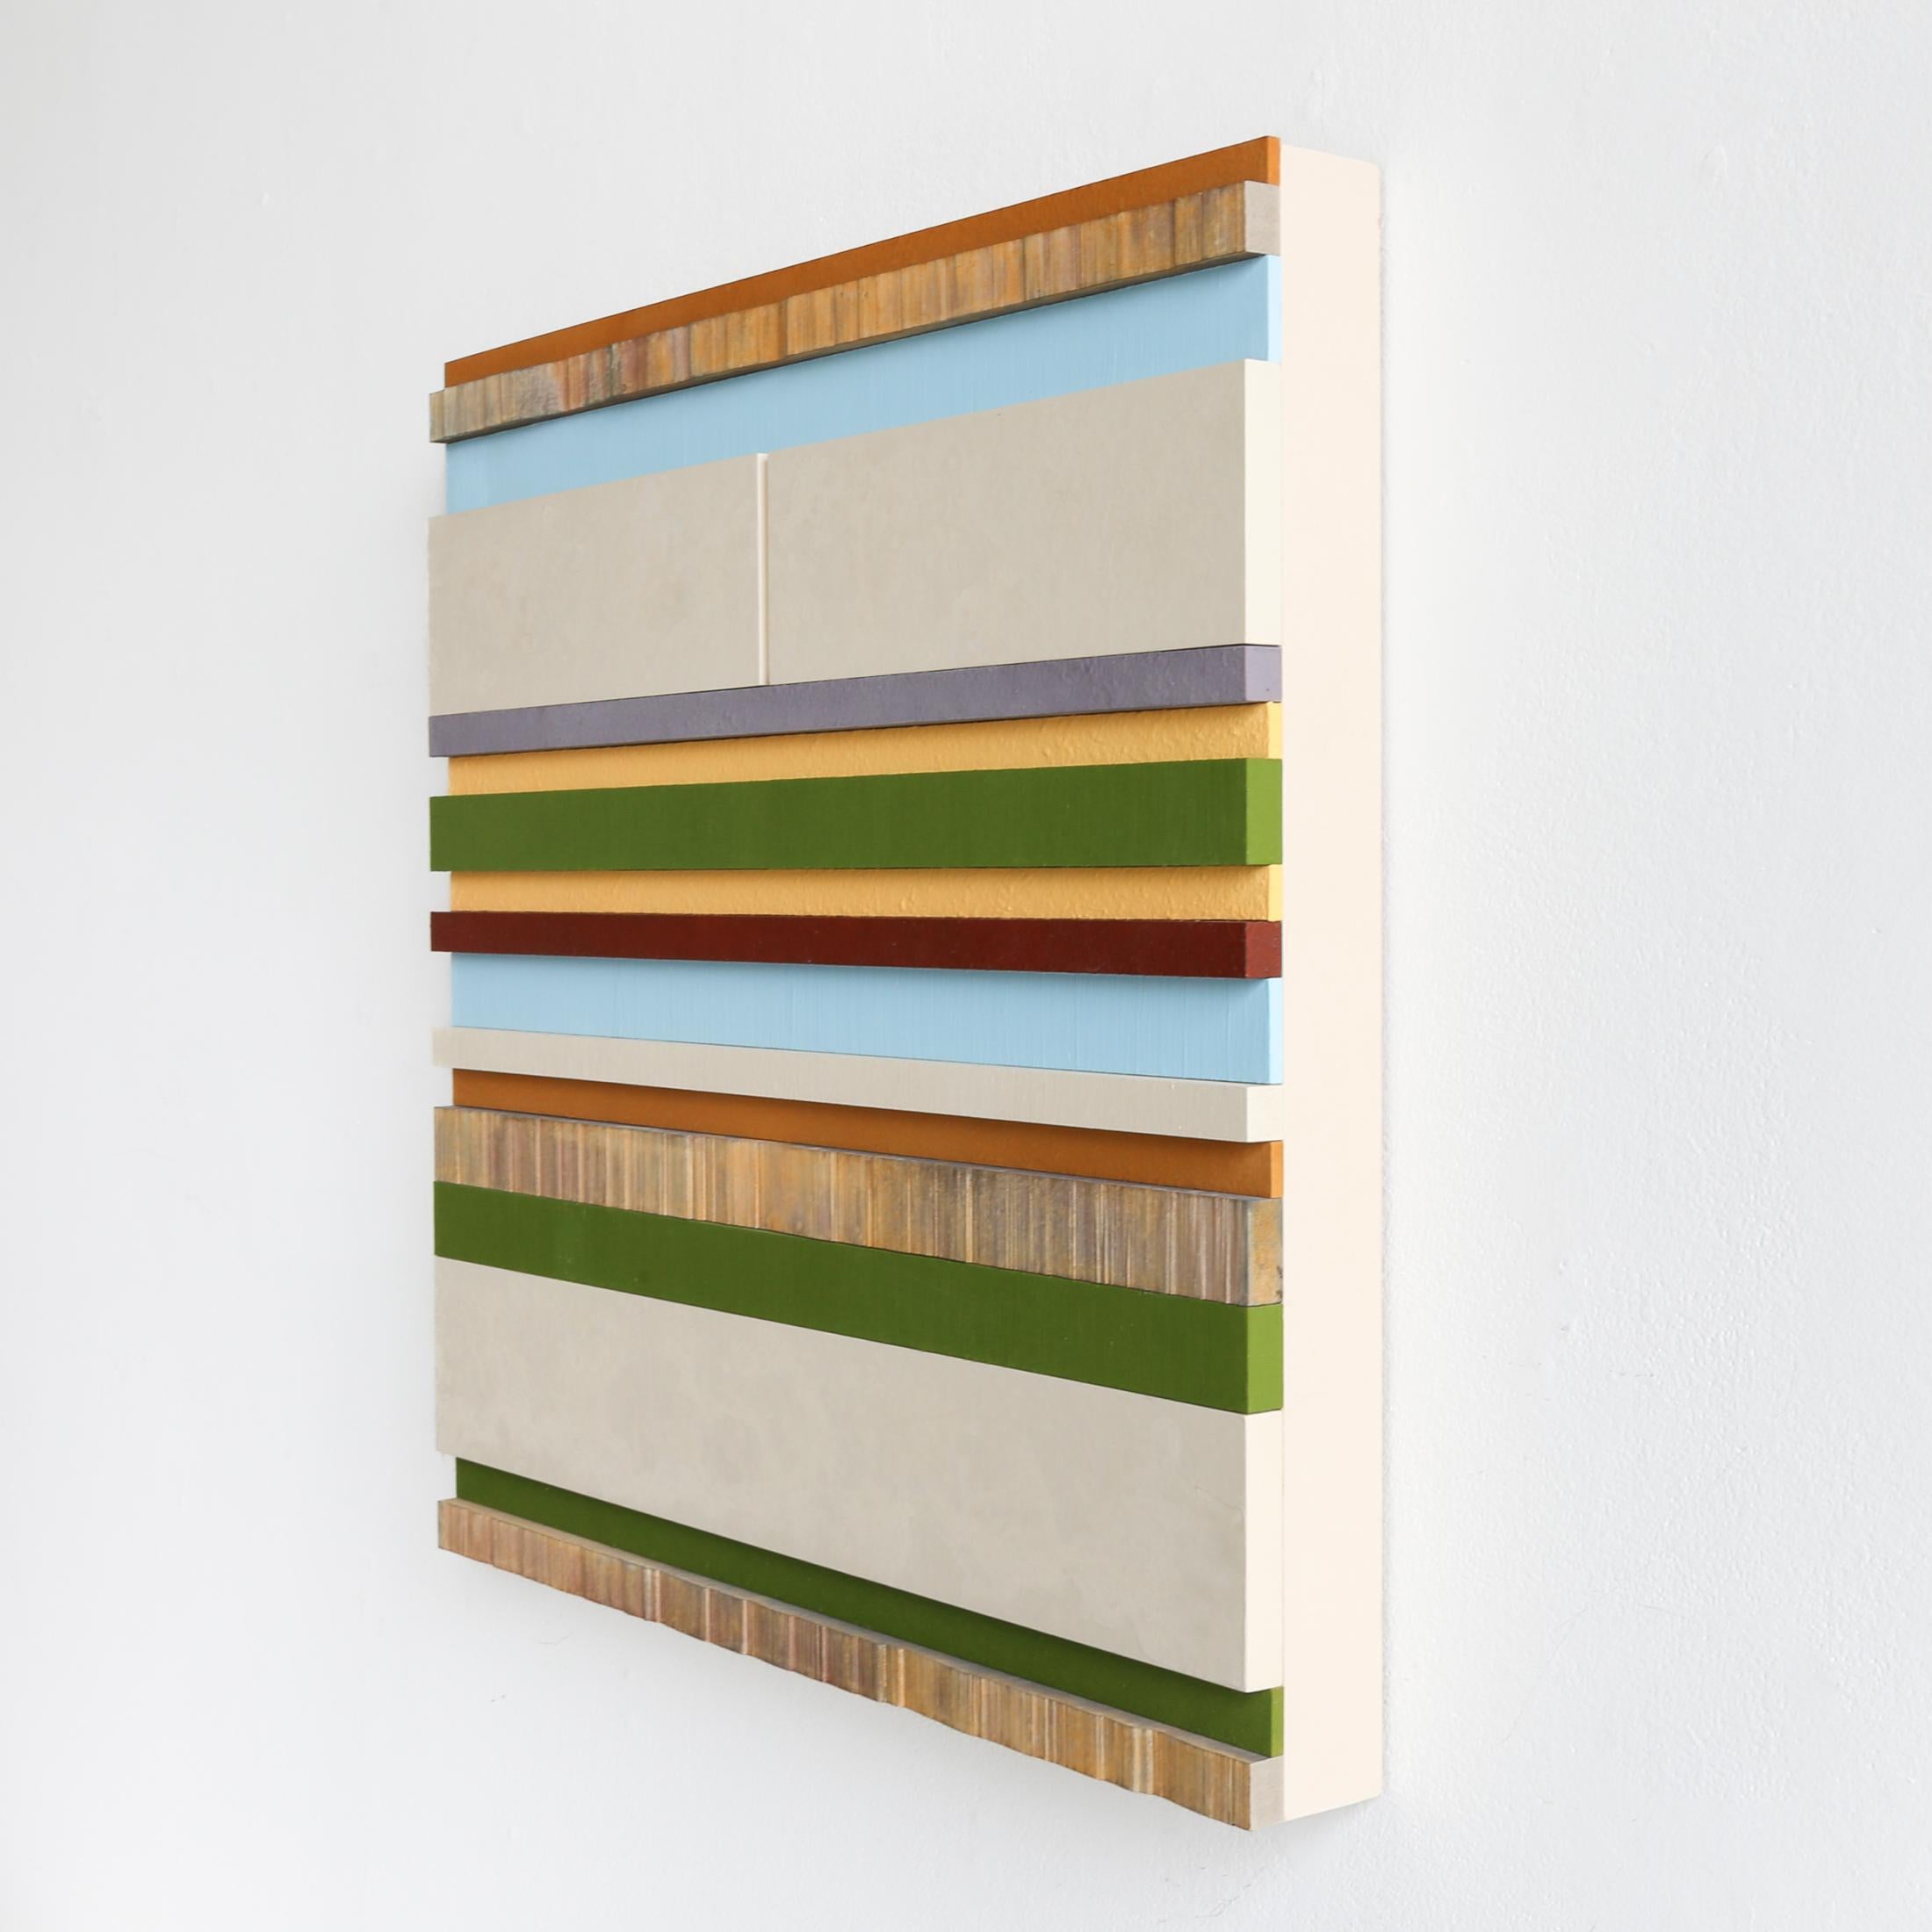 PASCAL PIERME
Tous Les Chemins 3
• wood and mixed media
24.00w x 24.00h x 3.00d in
$4,250.00

Pascal Pierme does not “feel good” unless he is making. From an early age, his grandfather’s garage studio inspired him to push the boundaries of his